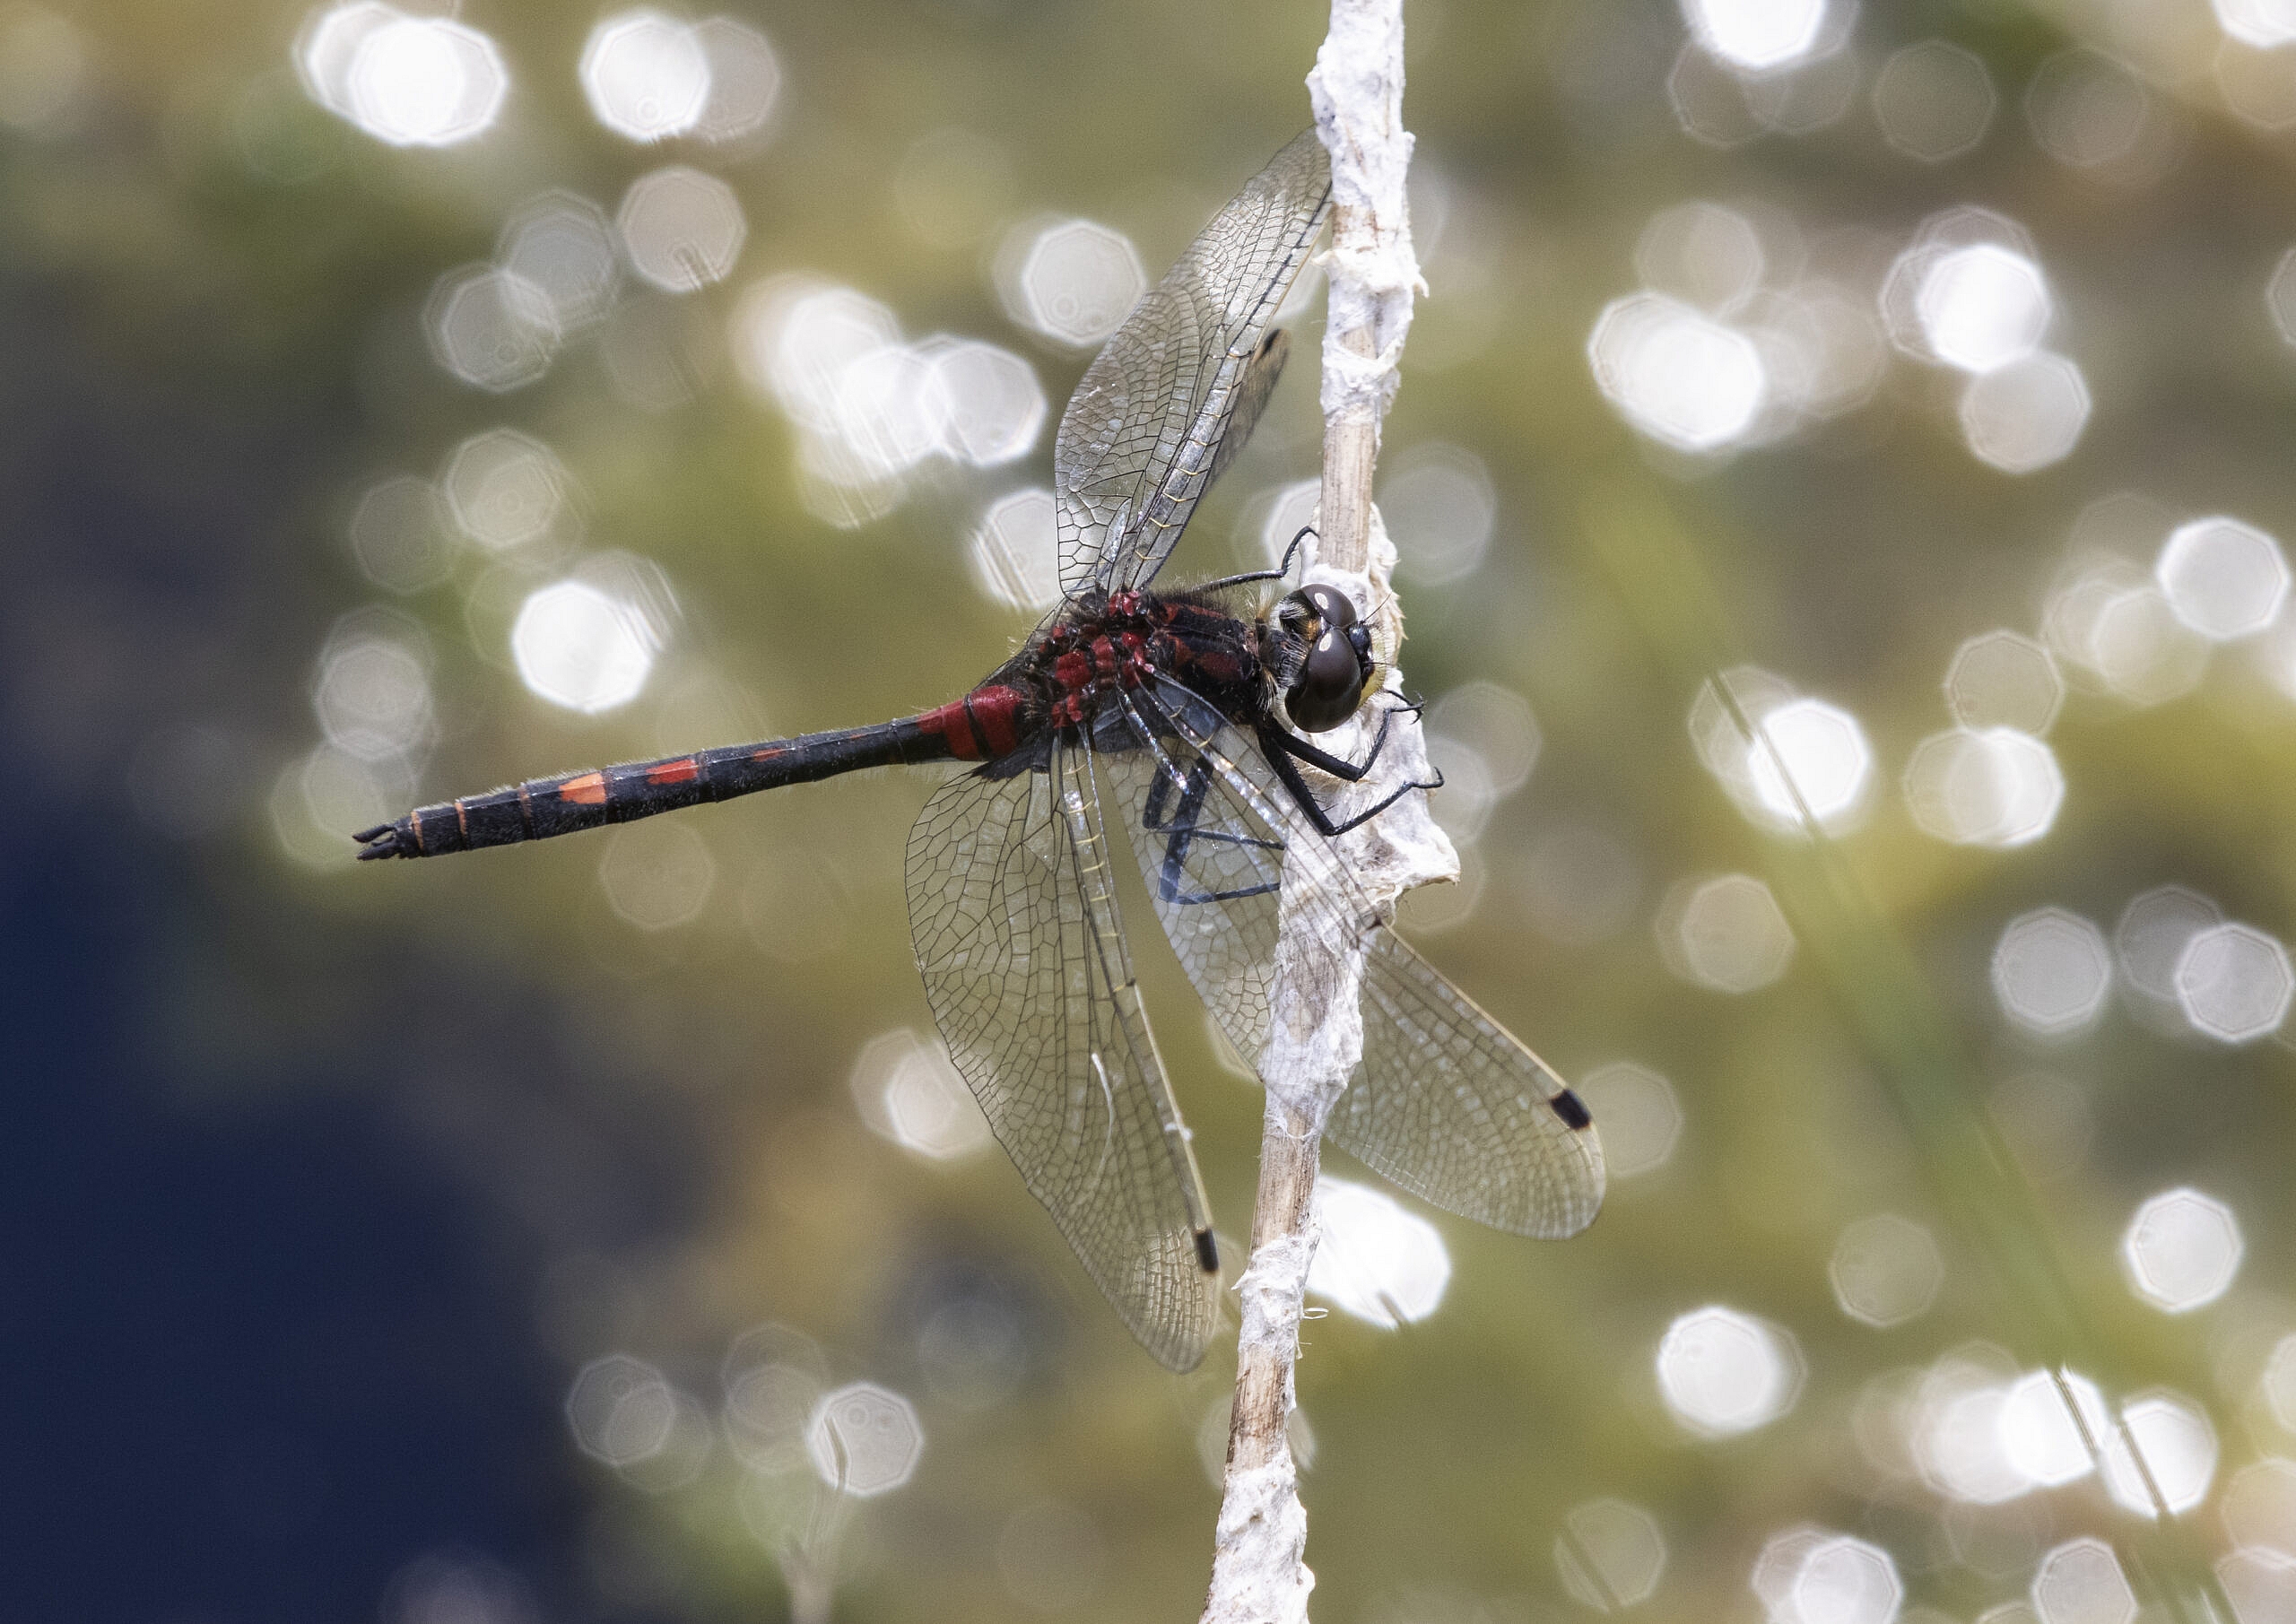 The white-faced darter dragonfly